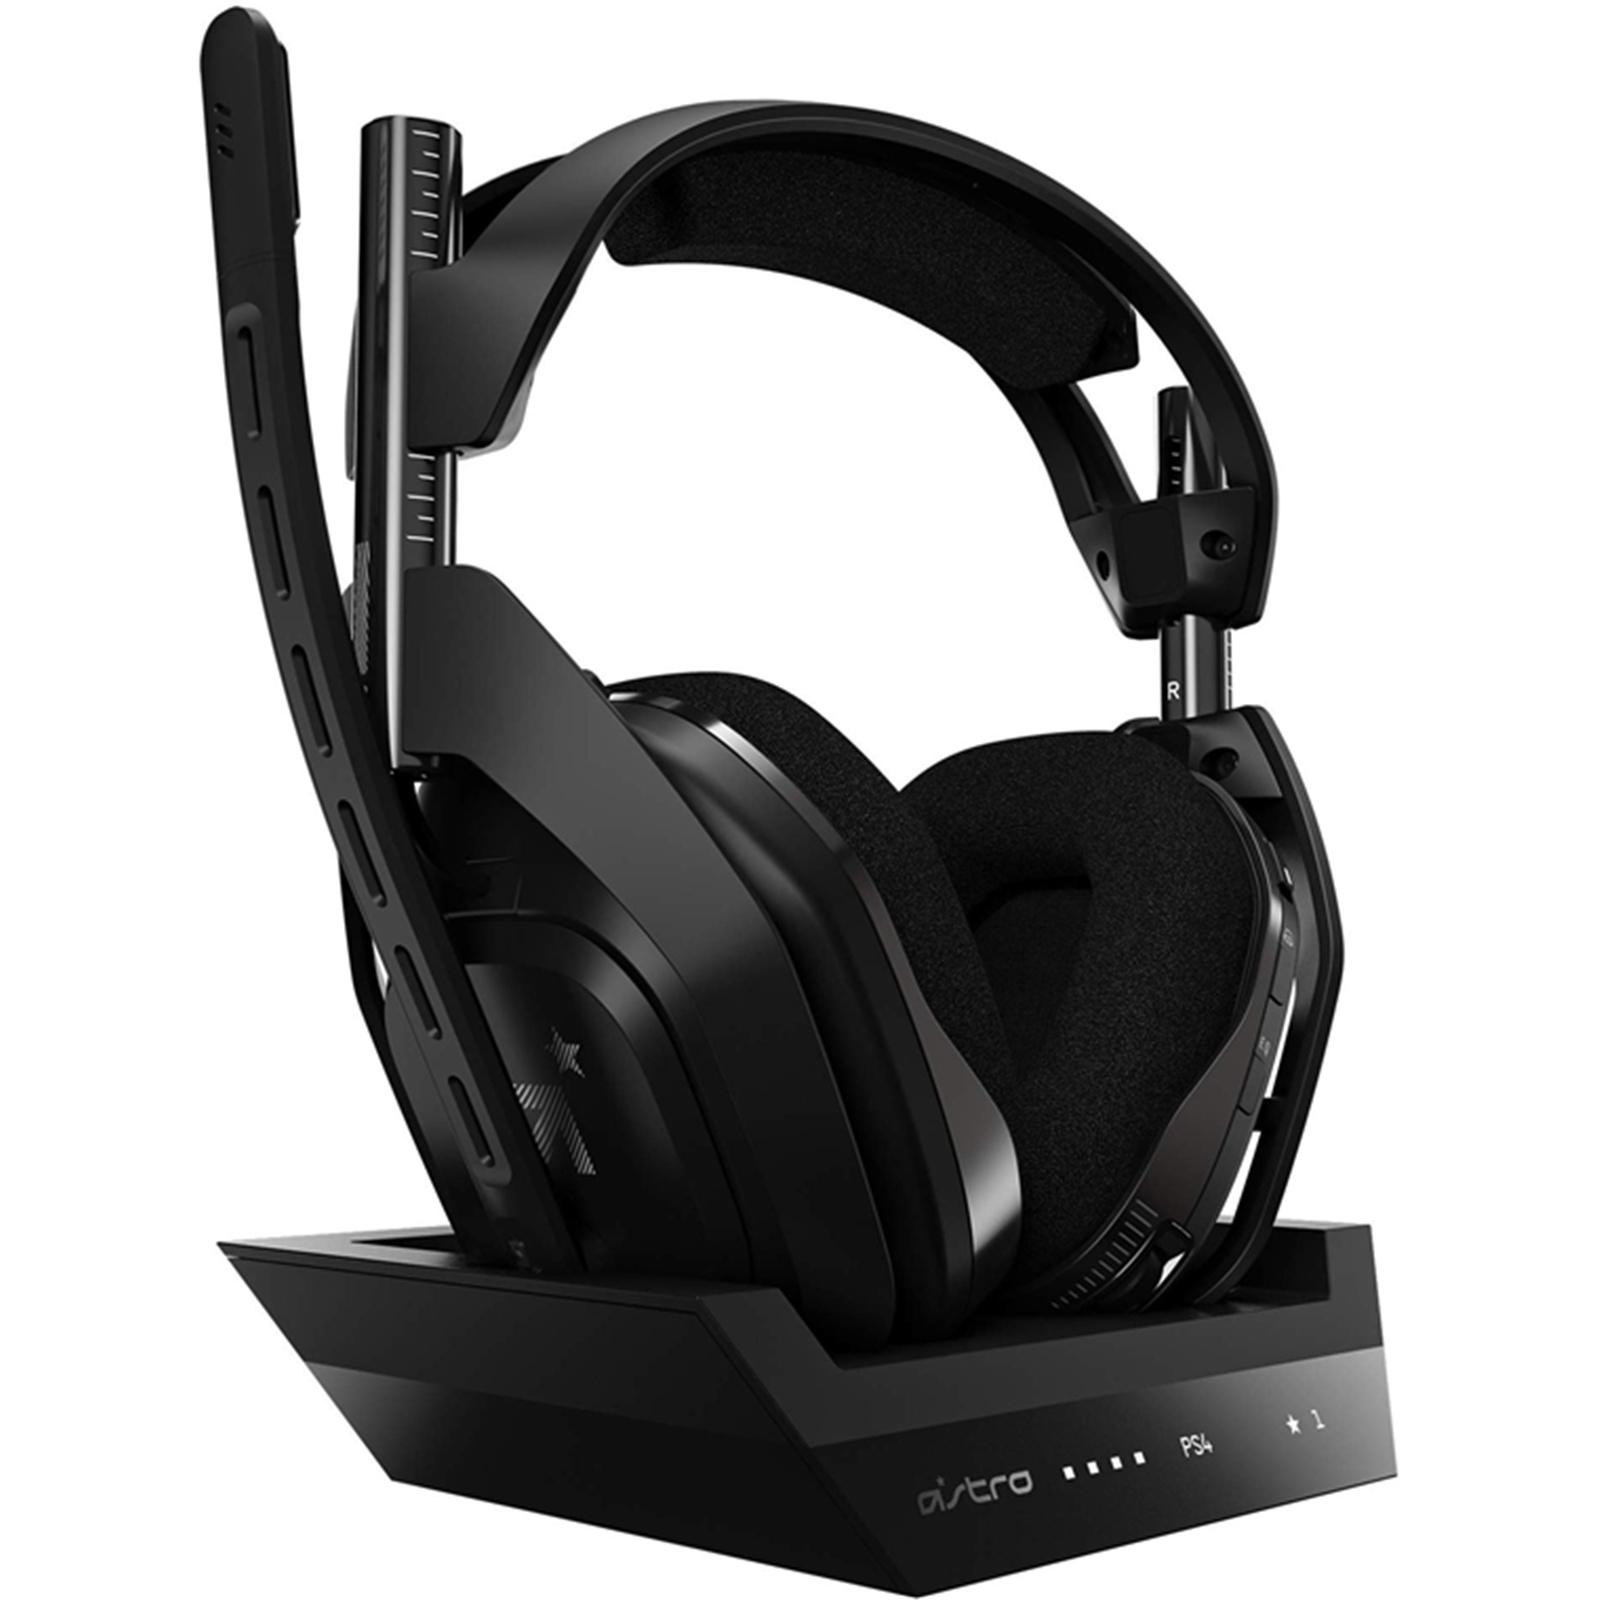 Buy the Astro A50 Wireless Gaming Headset For Playstation 4, PC & Mac,  Discord... ( 939-001673 ) online - PBTech.com/au